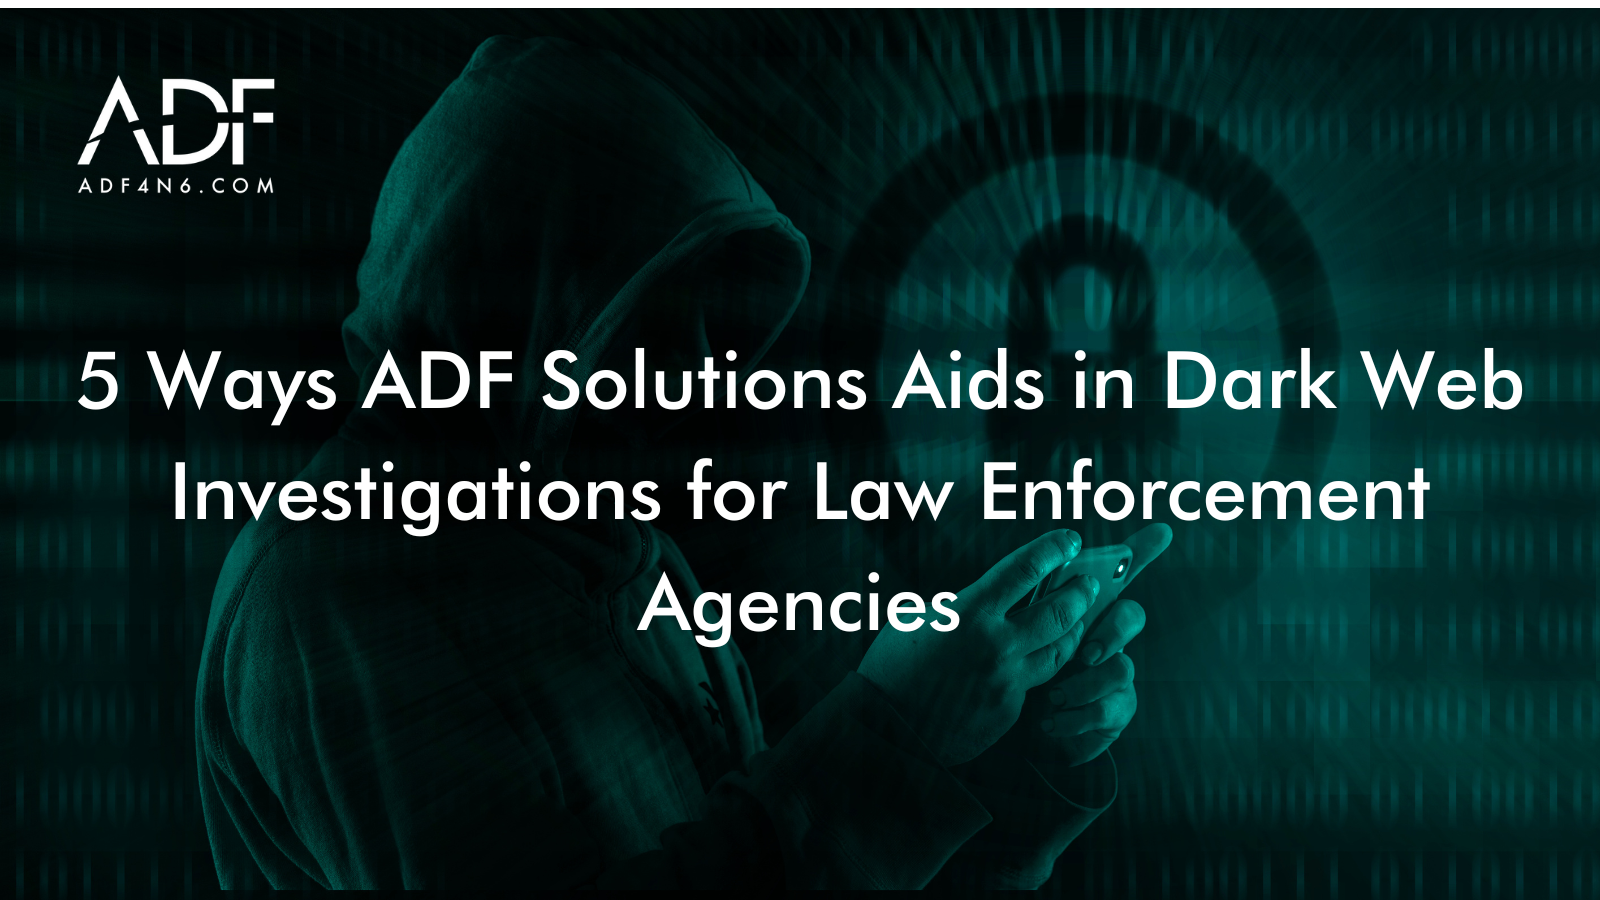 5 Ways ADF Solutions Aids in Dark Web Investigations for Law Enforcement Agencies